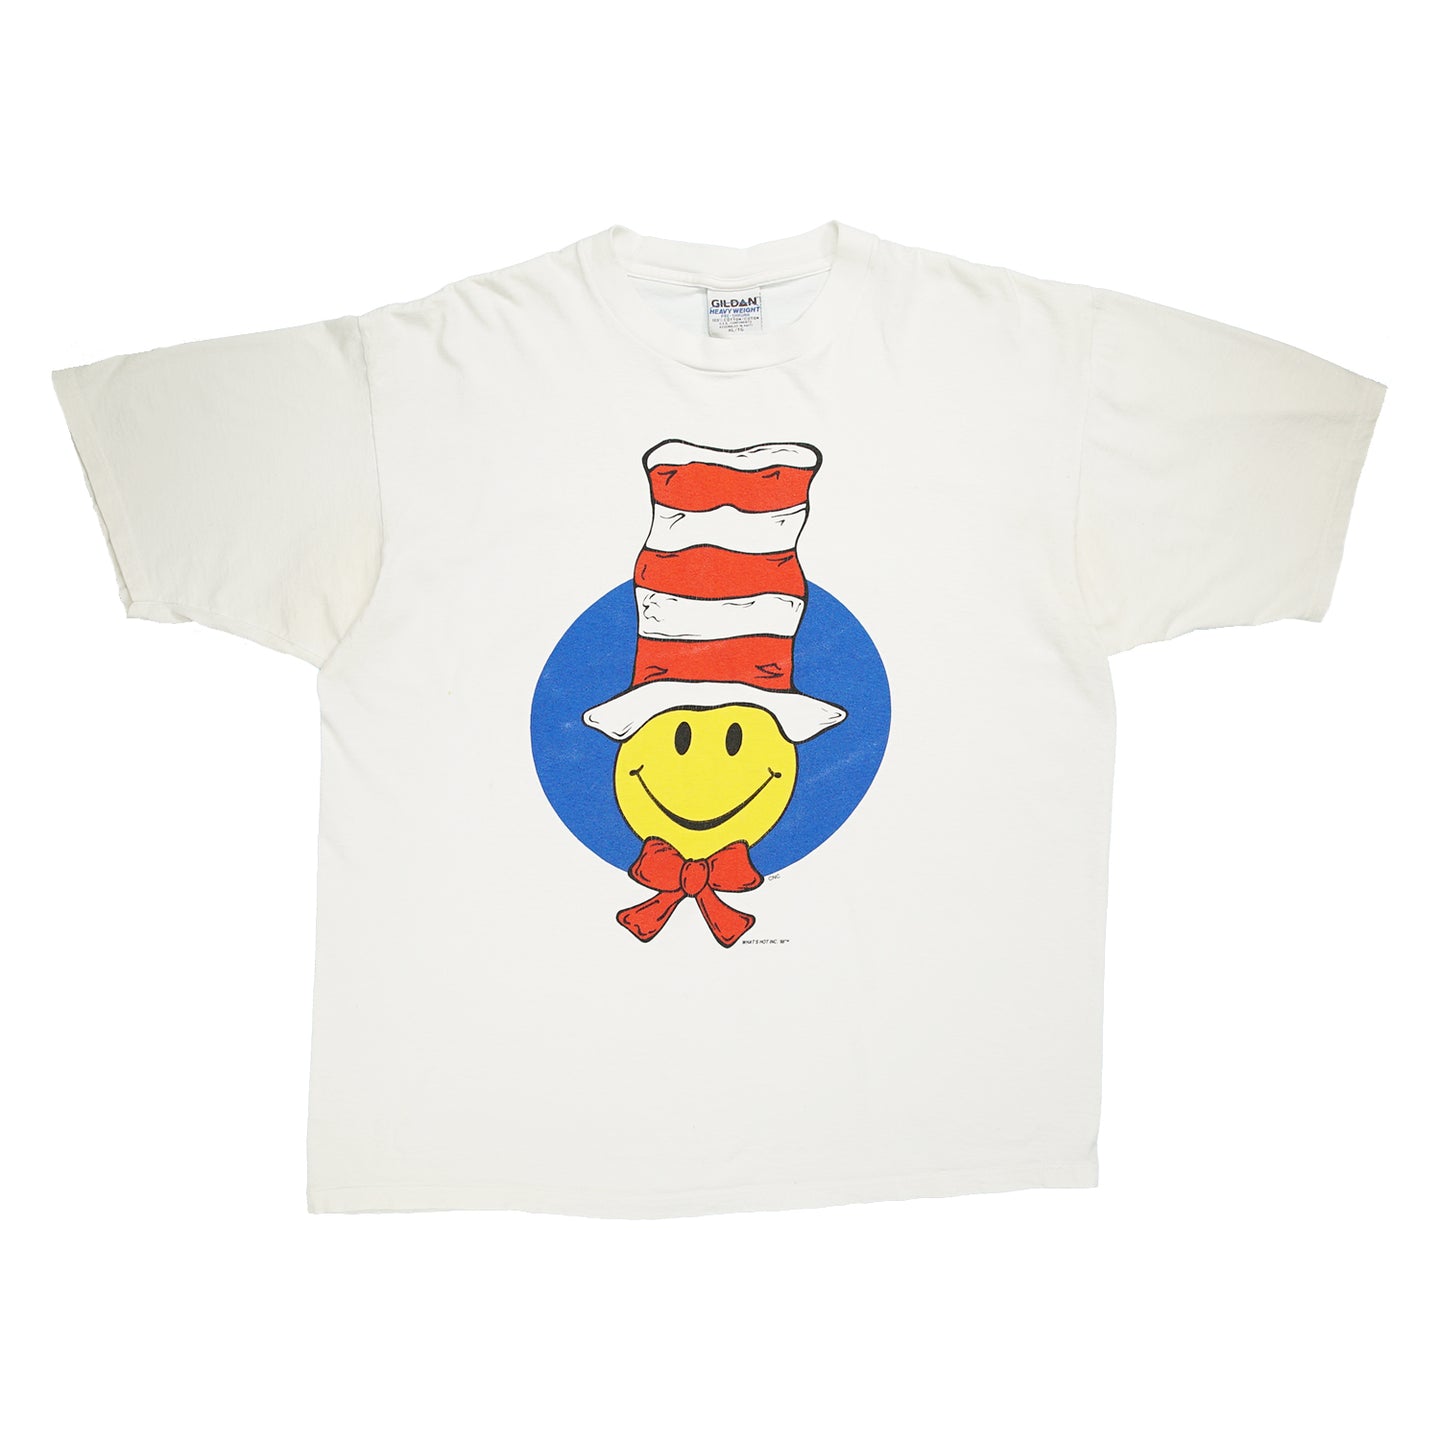 1996 smiley face Cat in the Hat tee XL